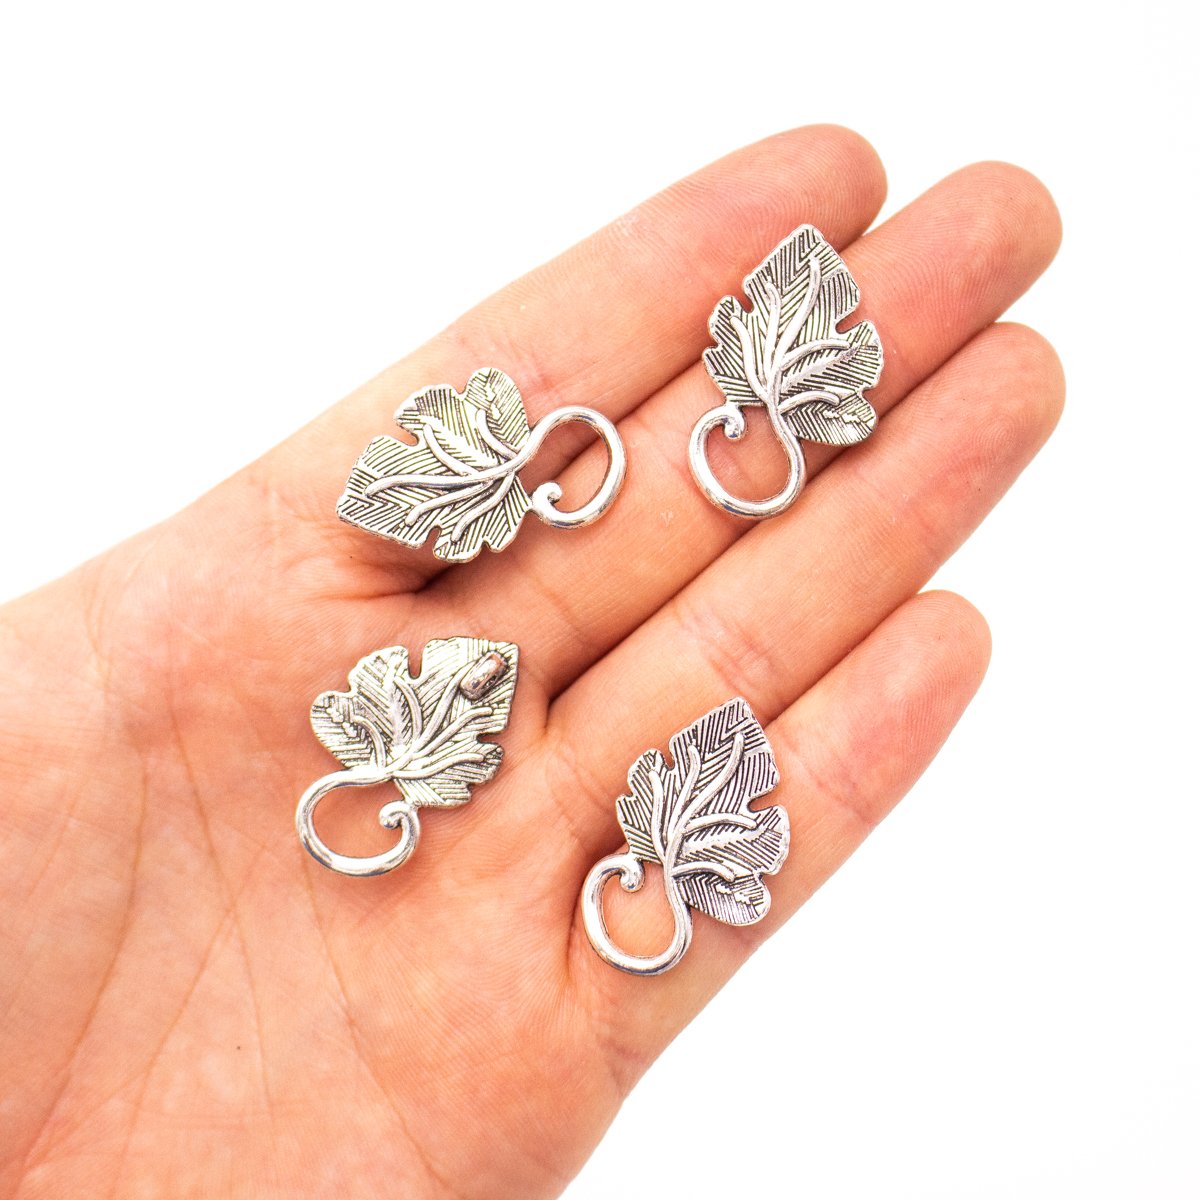 10 units 19x31mm Pendant antique silver Wine Leaf jewelry pendant Jewelry Findings & Components D-3-421